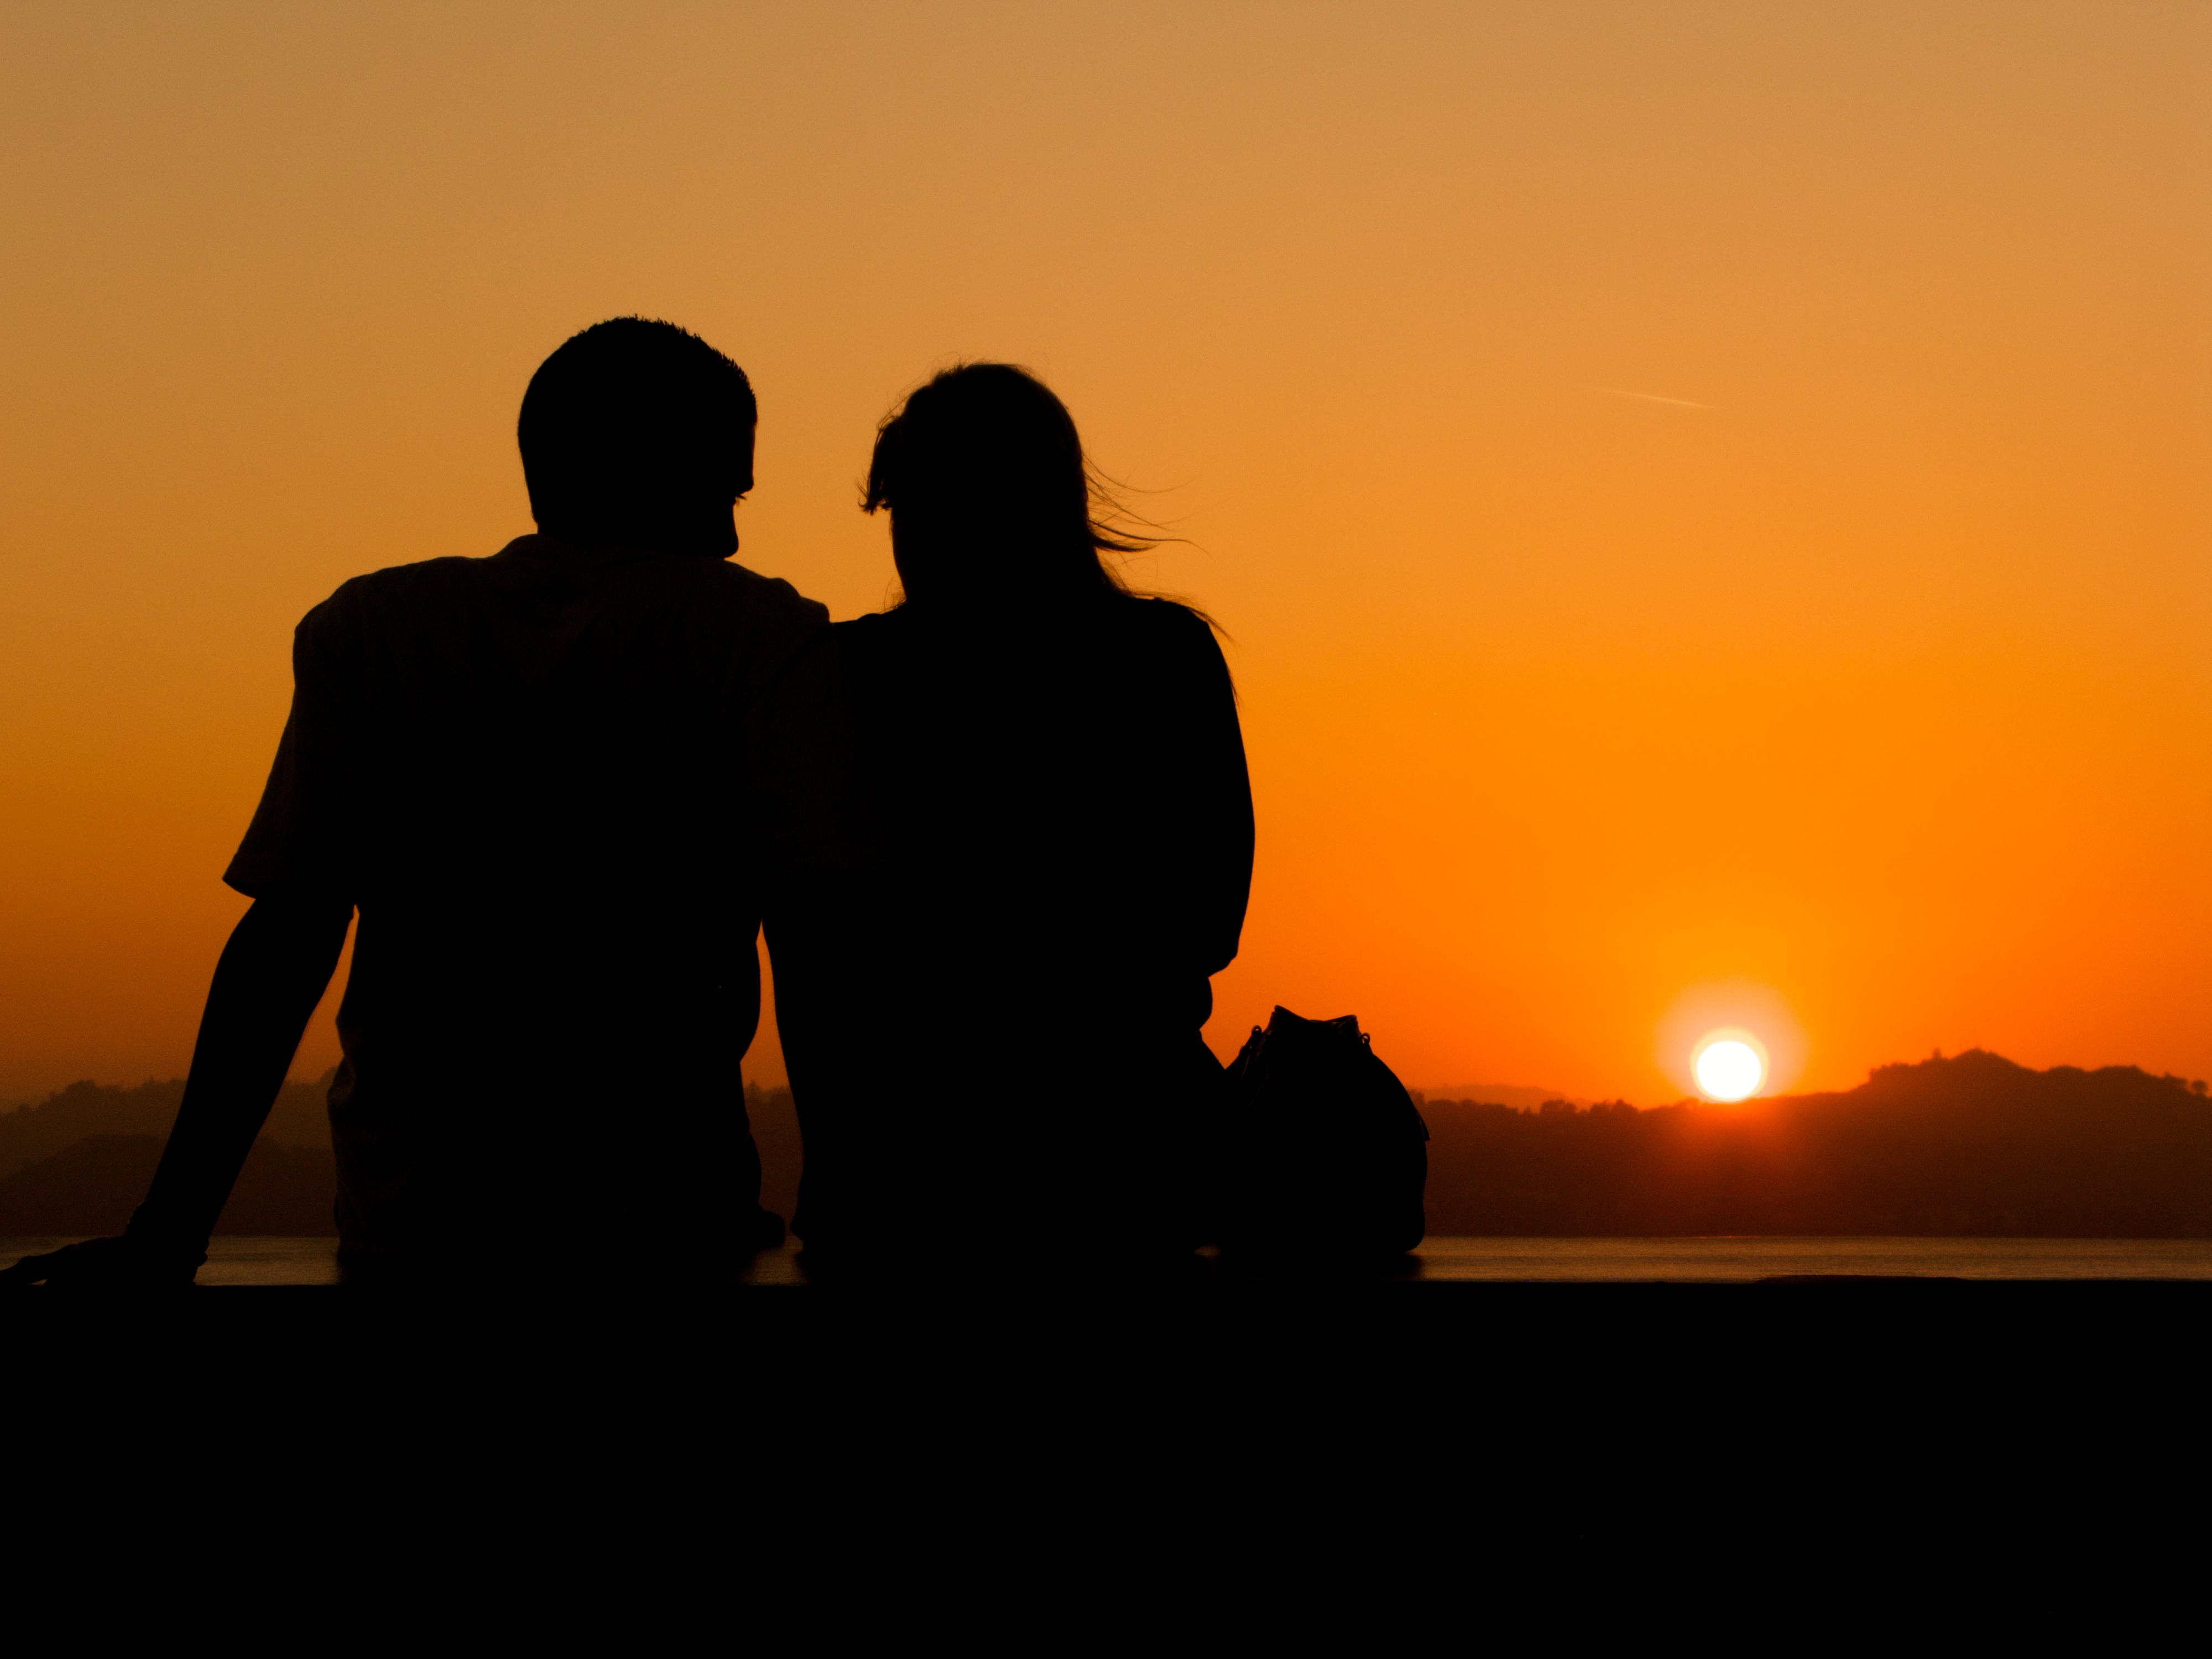 Scenery Images: Sunset Couple Images